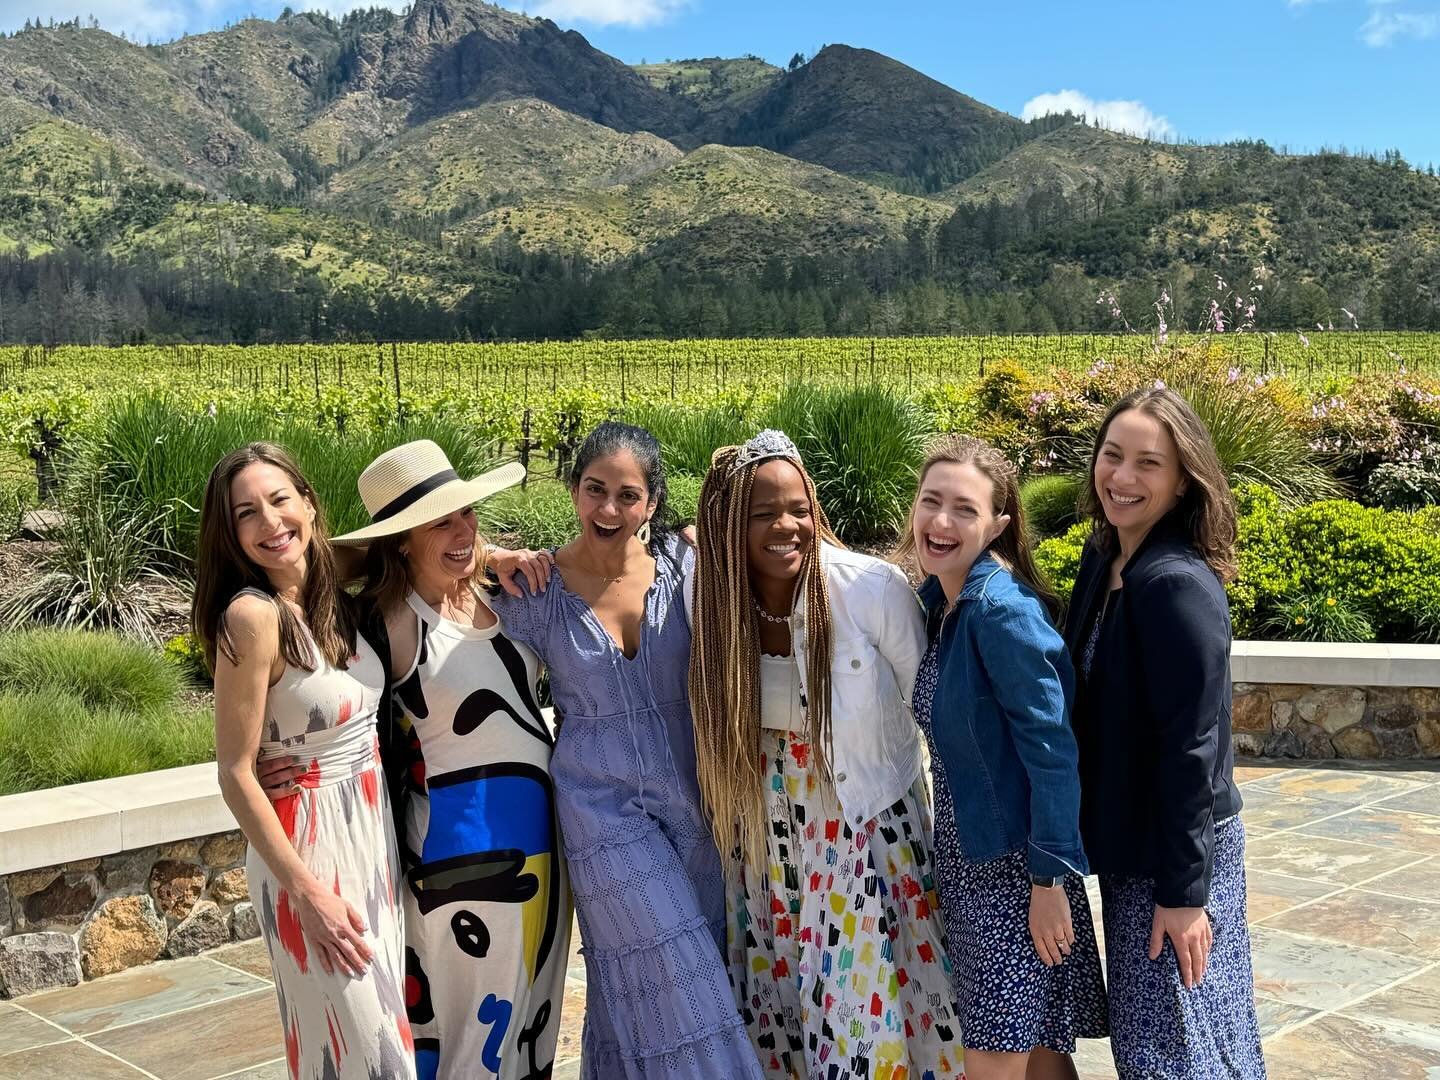 Couldn&rsquo;t ask for a more beautiful time. Thanks for having us @stfranciswinery!